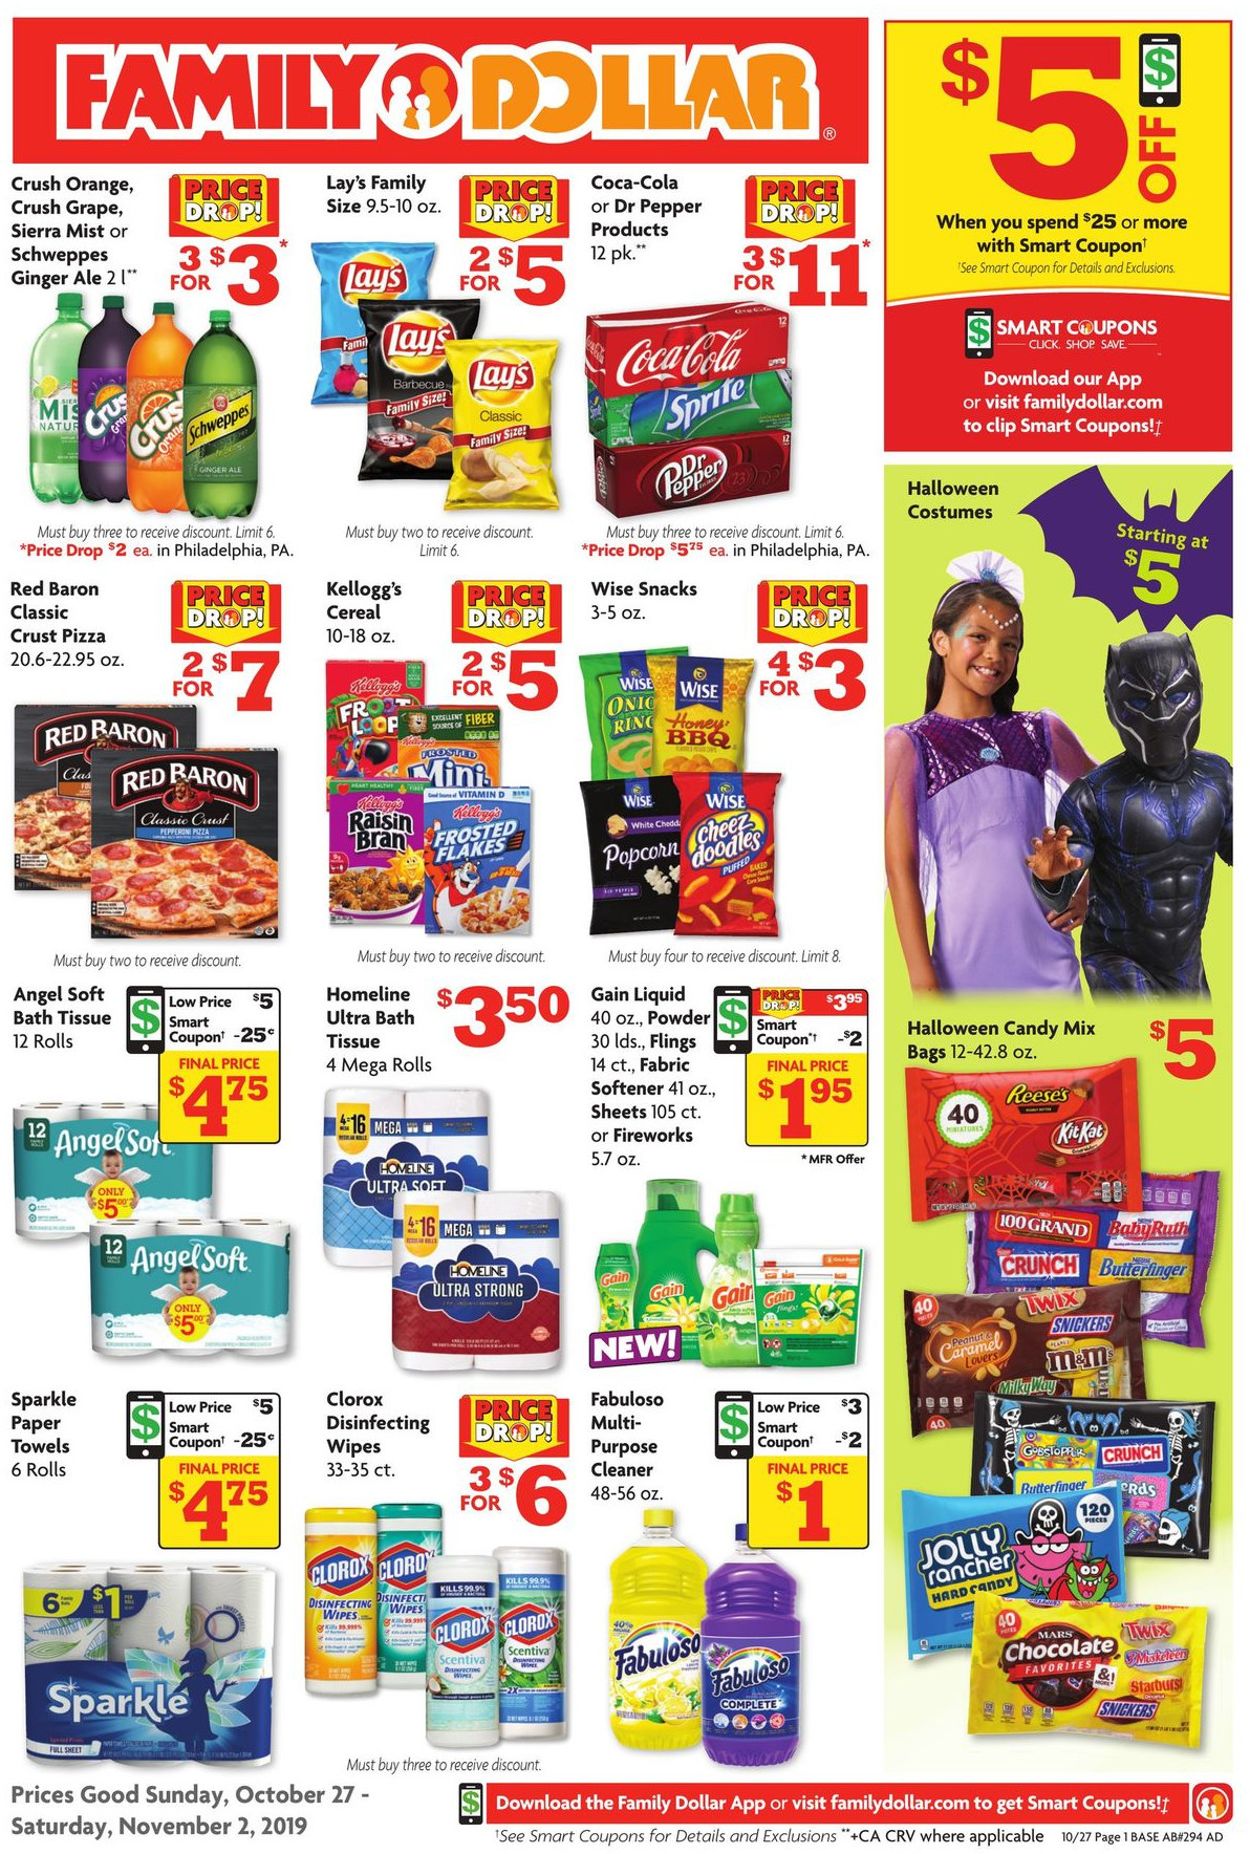 Family Dollar Current weekly ad 10/27 11/02/2019